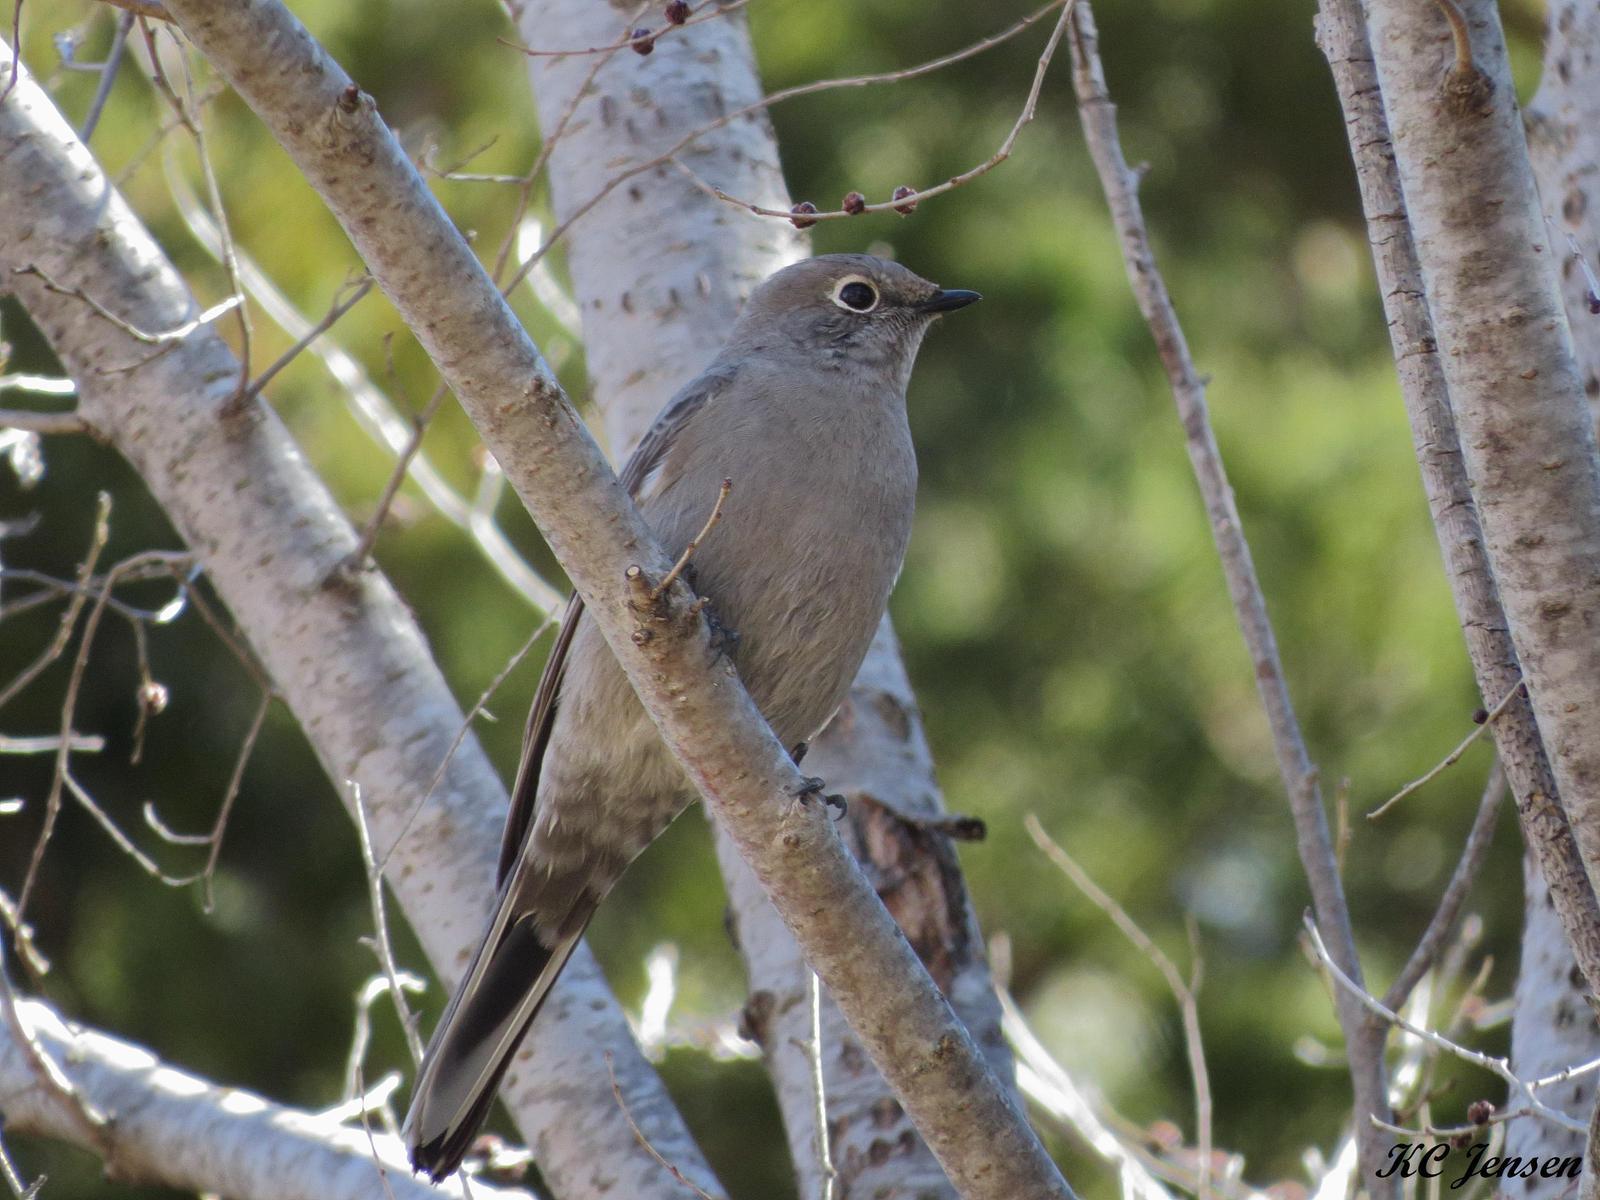 Townsend's Solitaire Photo by Kent Jensen